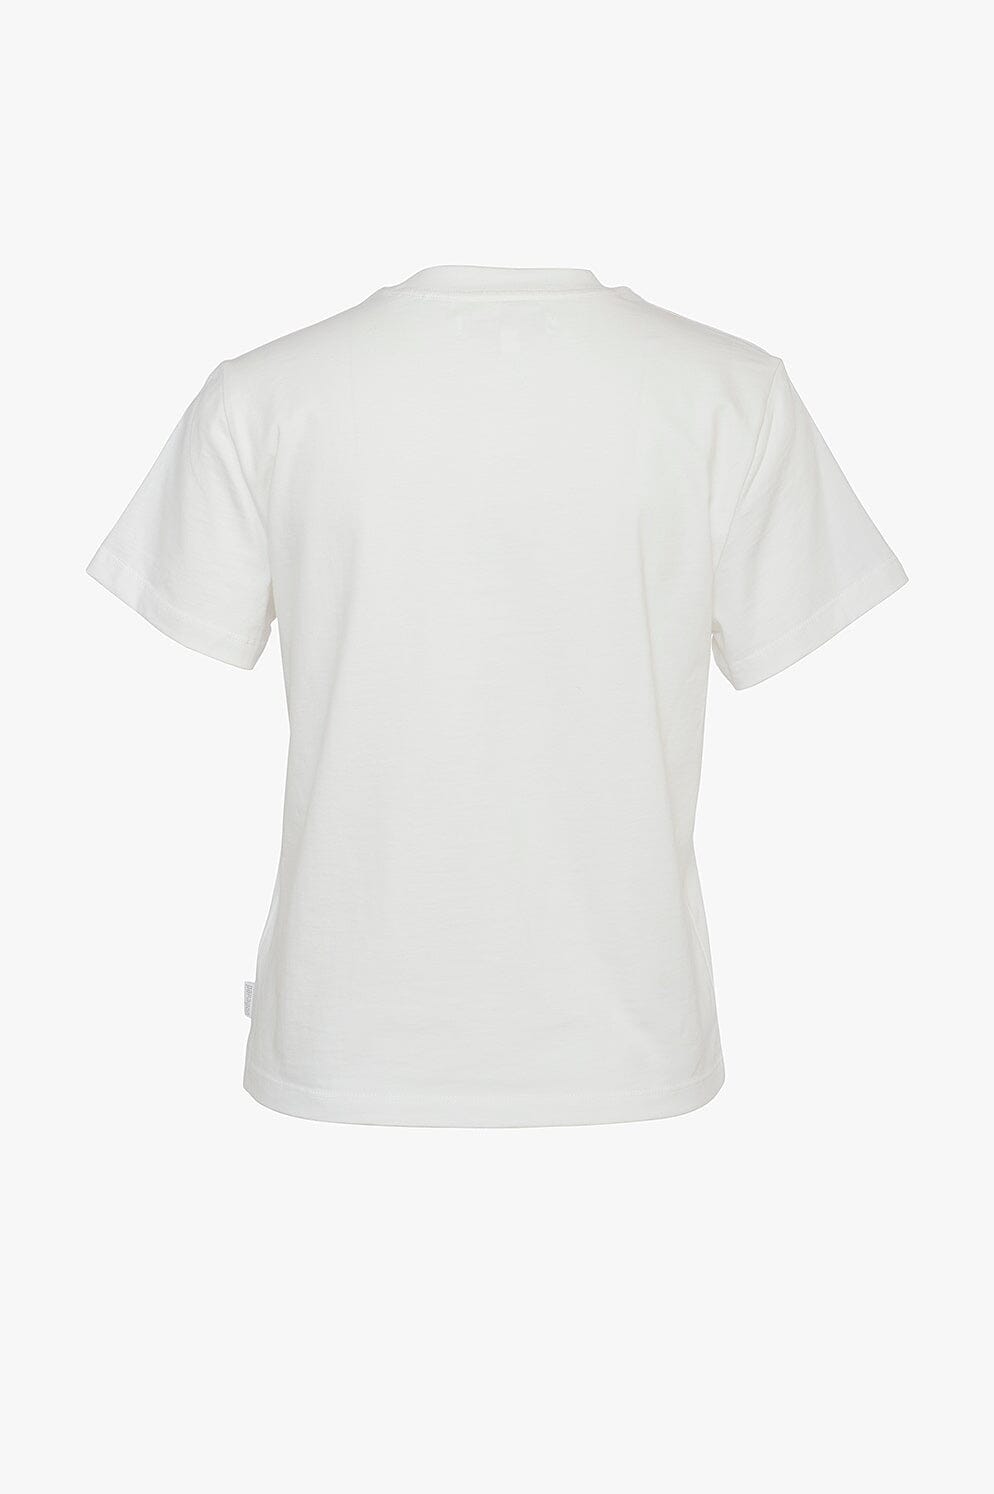 Paragon Olympia Offwhite T-shirt